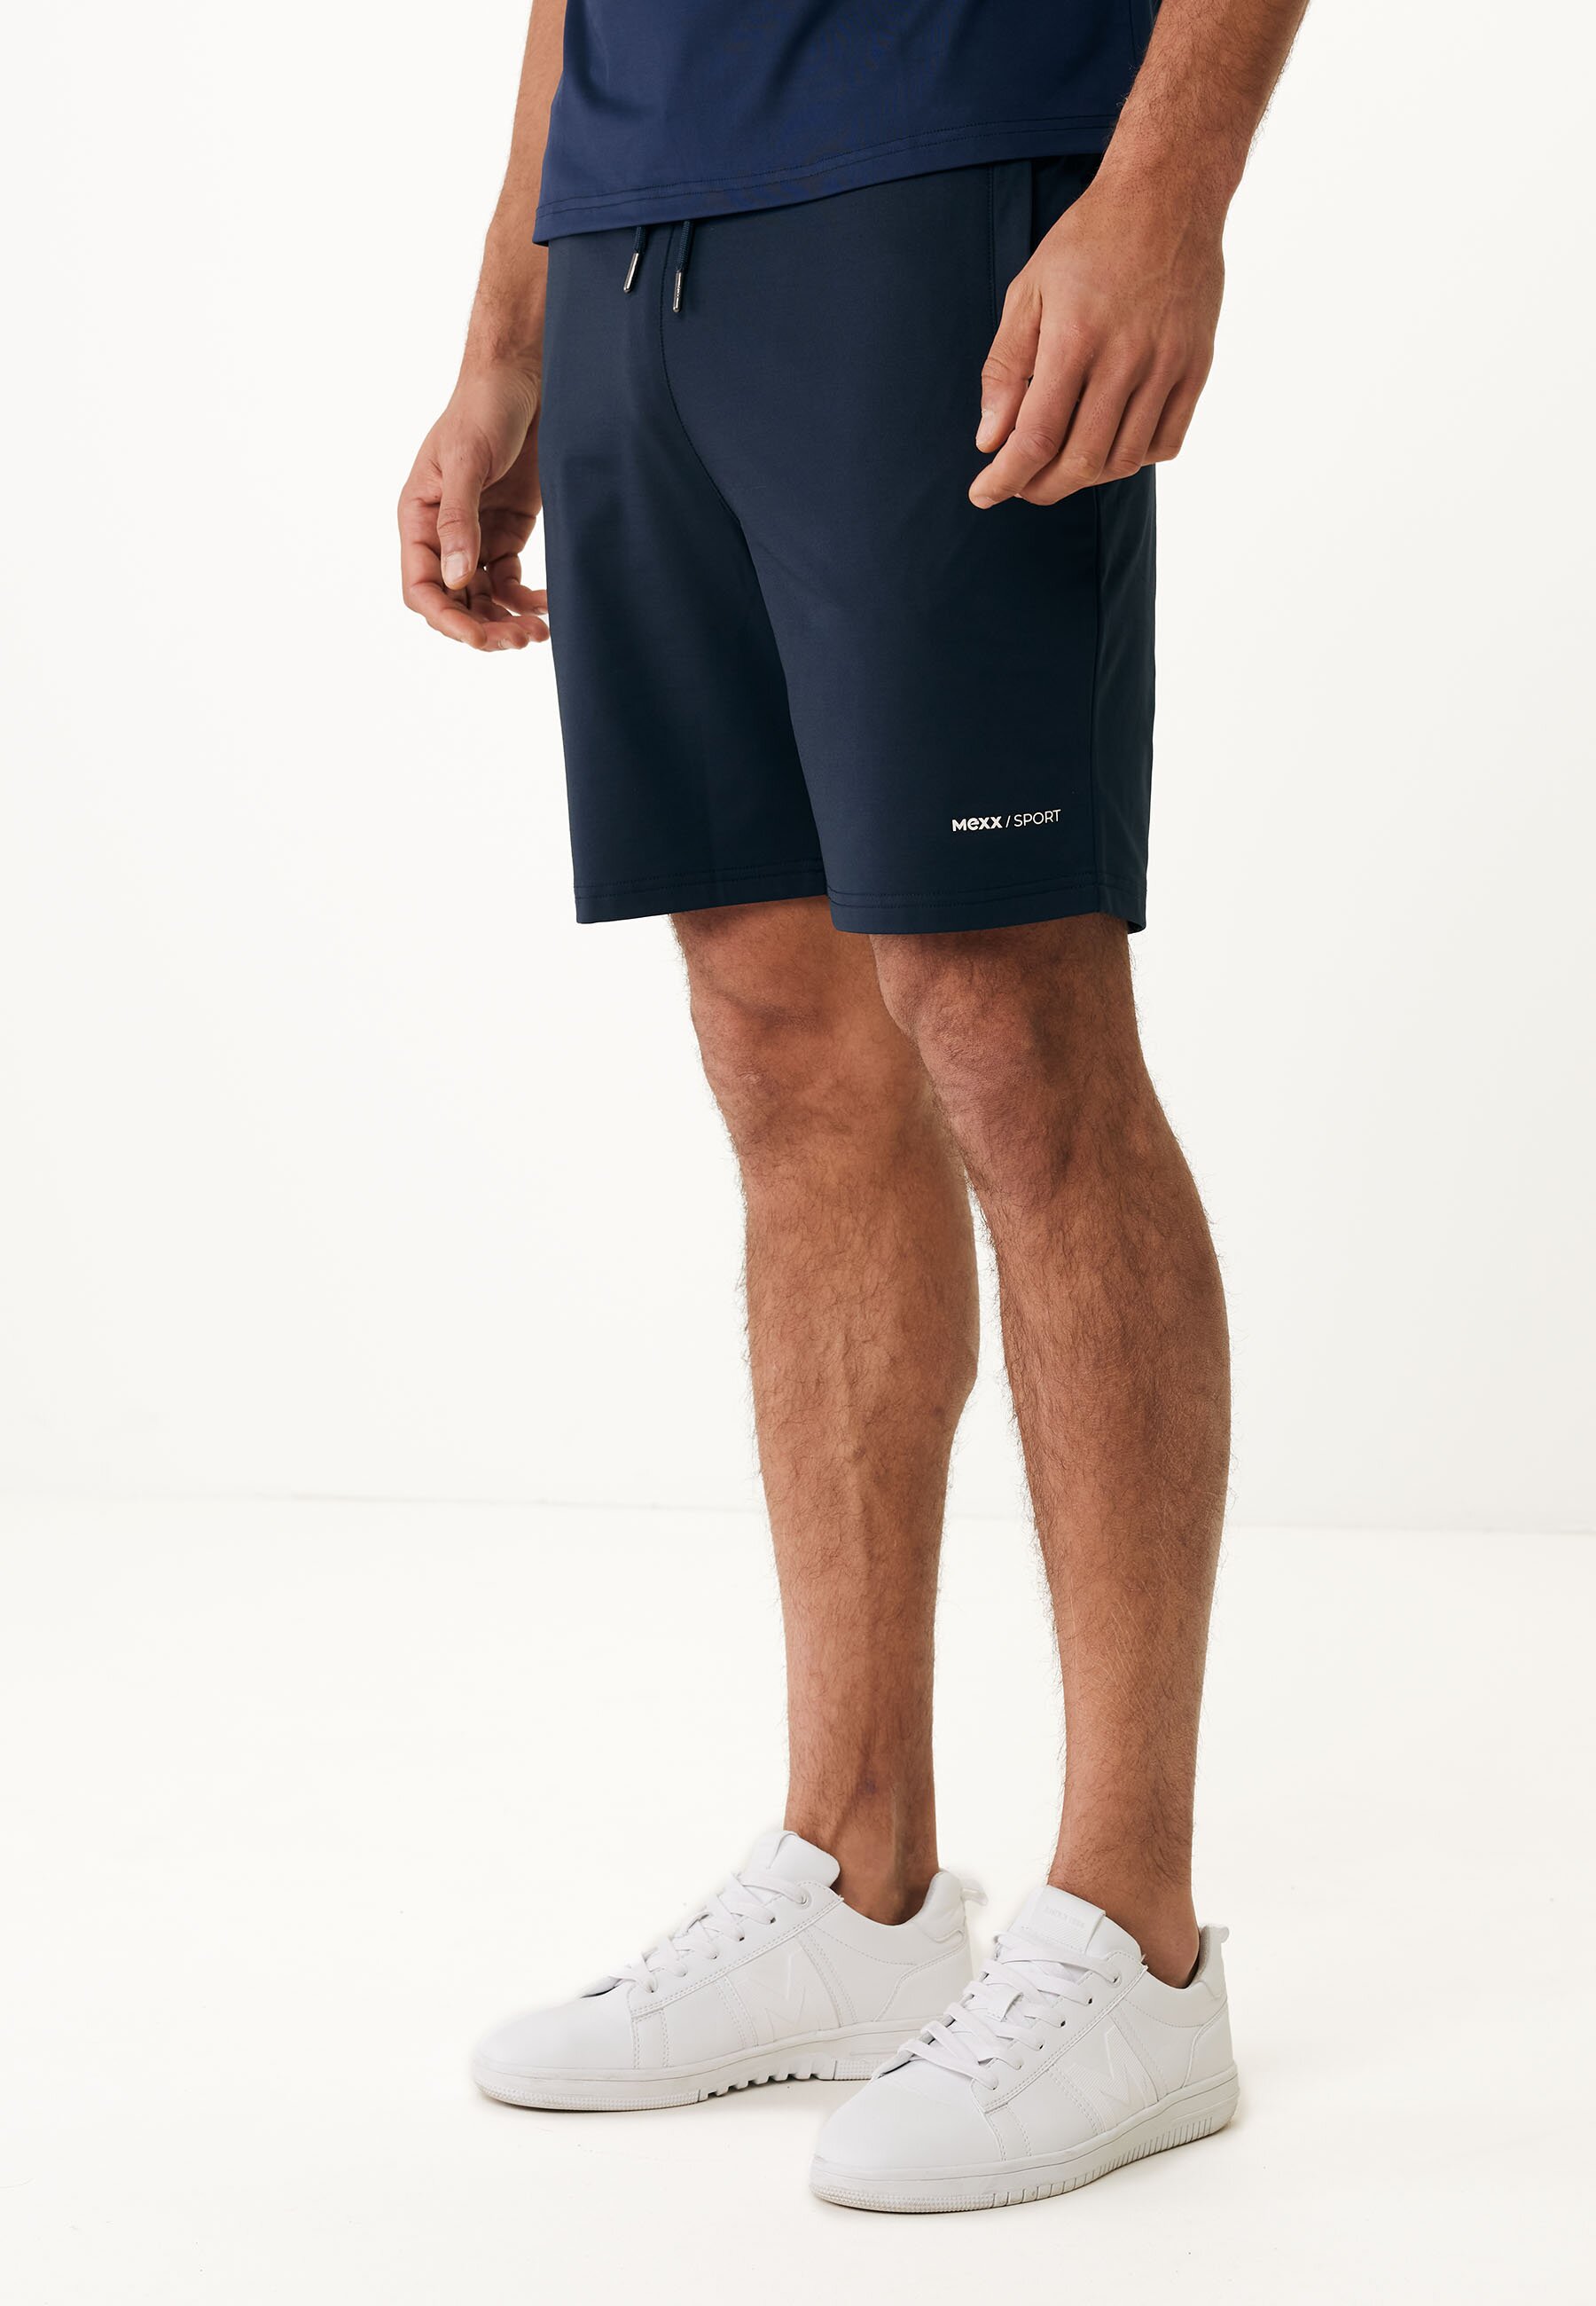 Mexx Activewear Shorts With Contrast Back Panel Mannen - Navy - Maat S